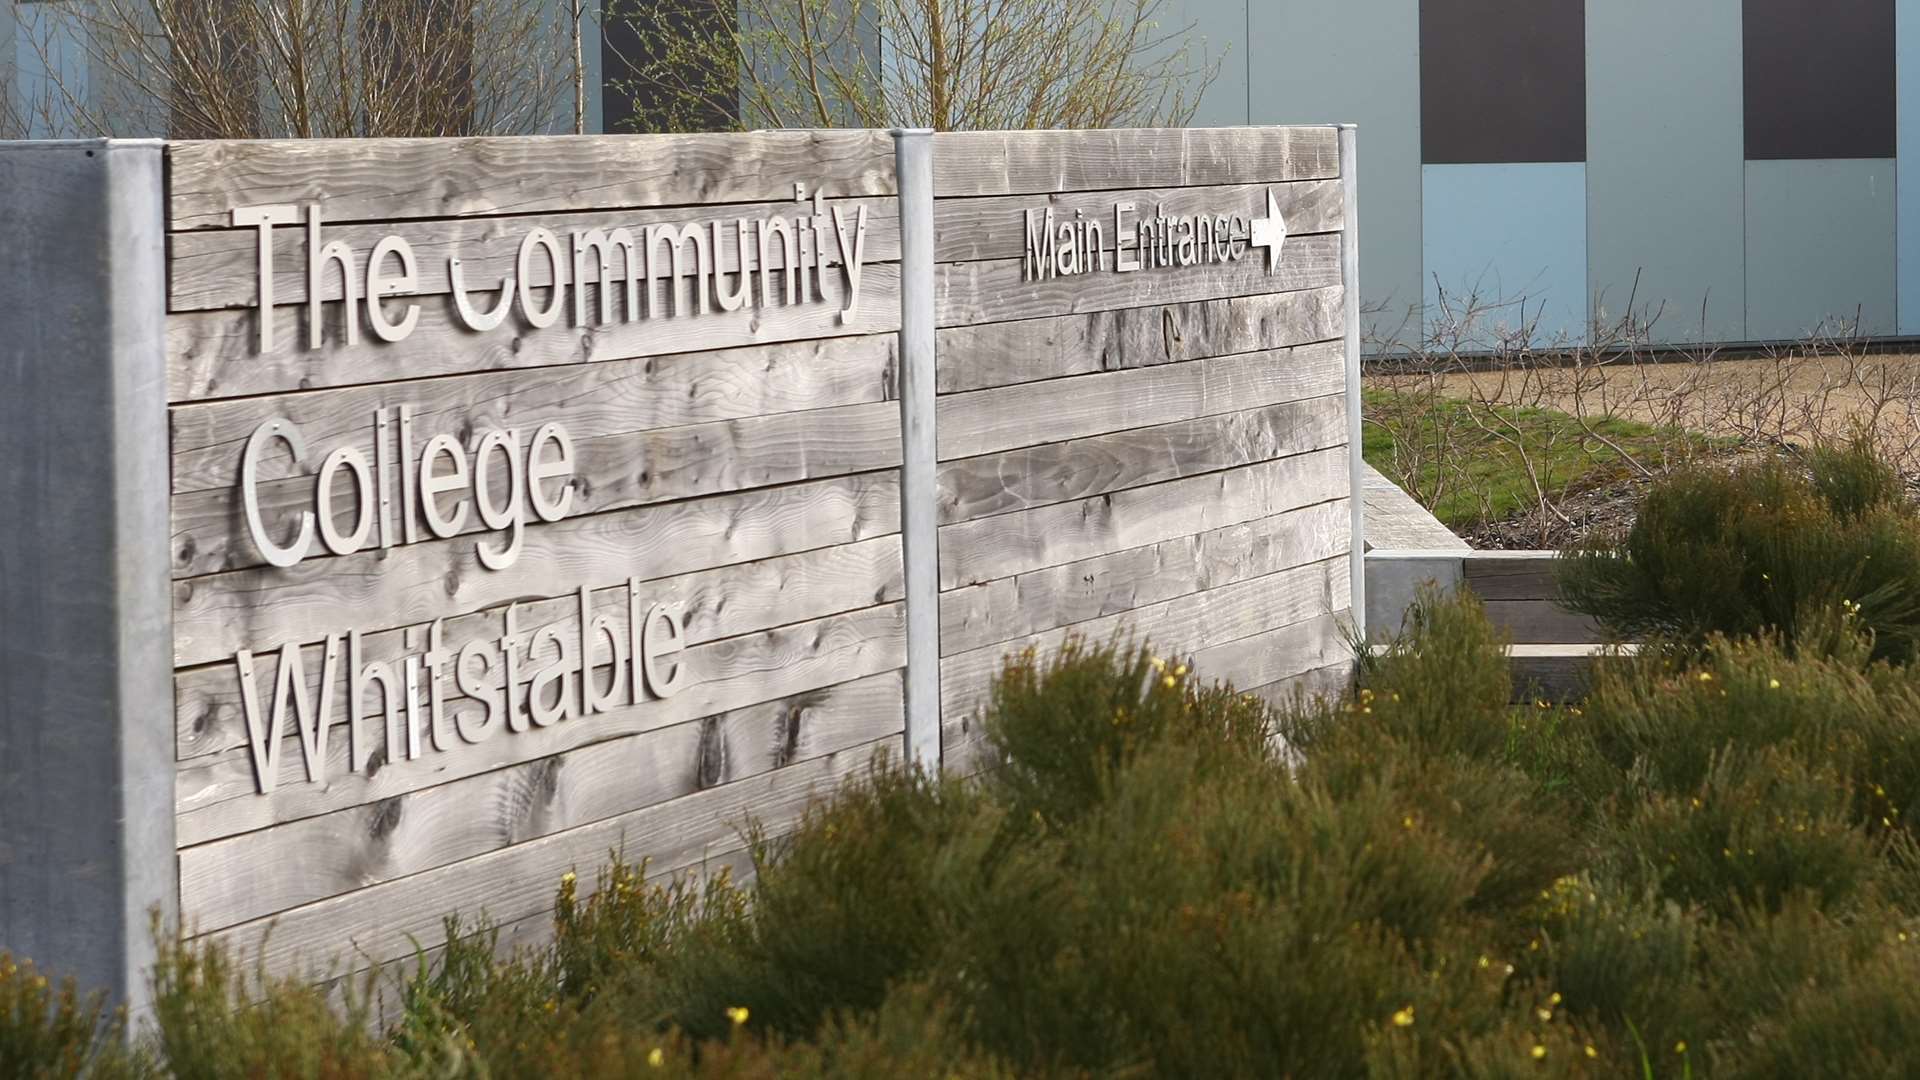 The Community College Whitstable